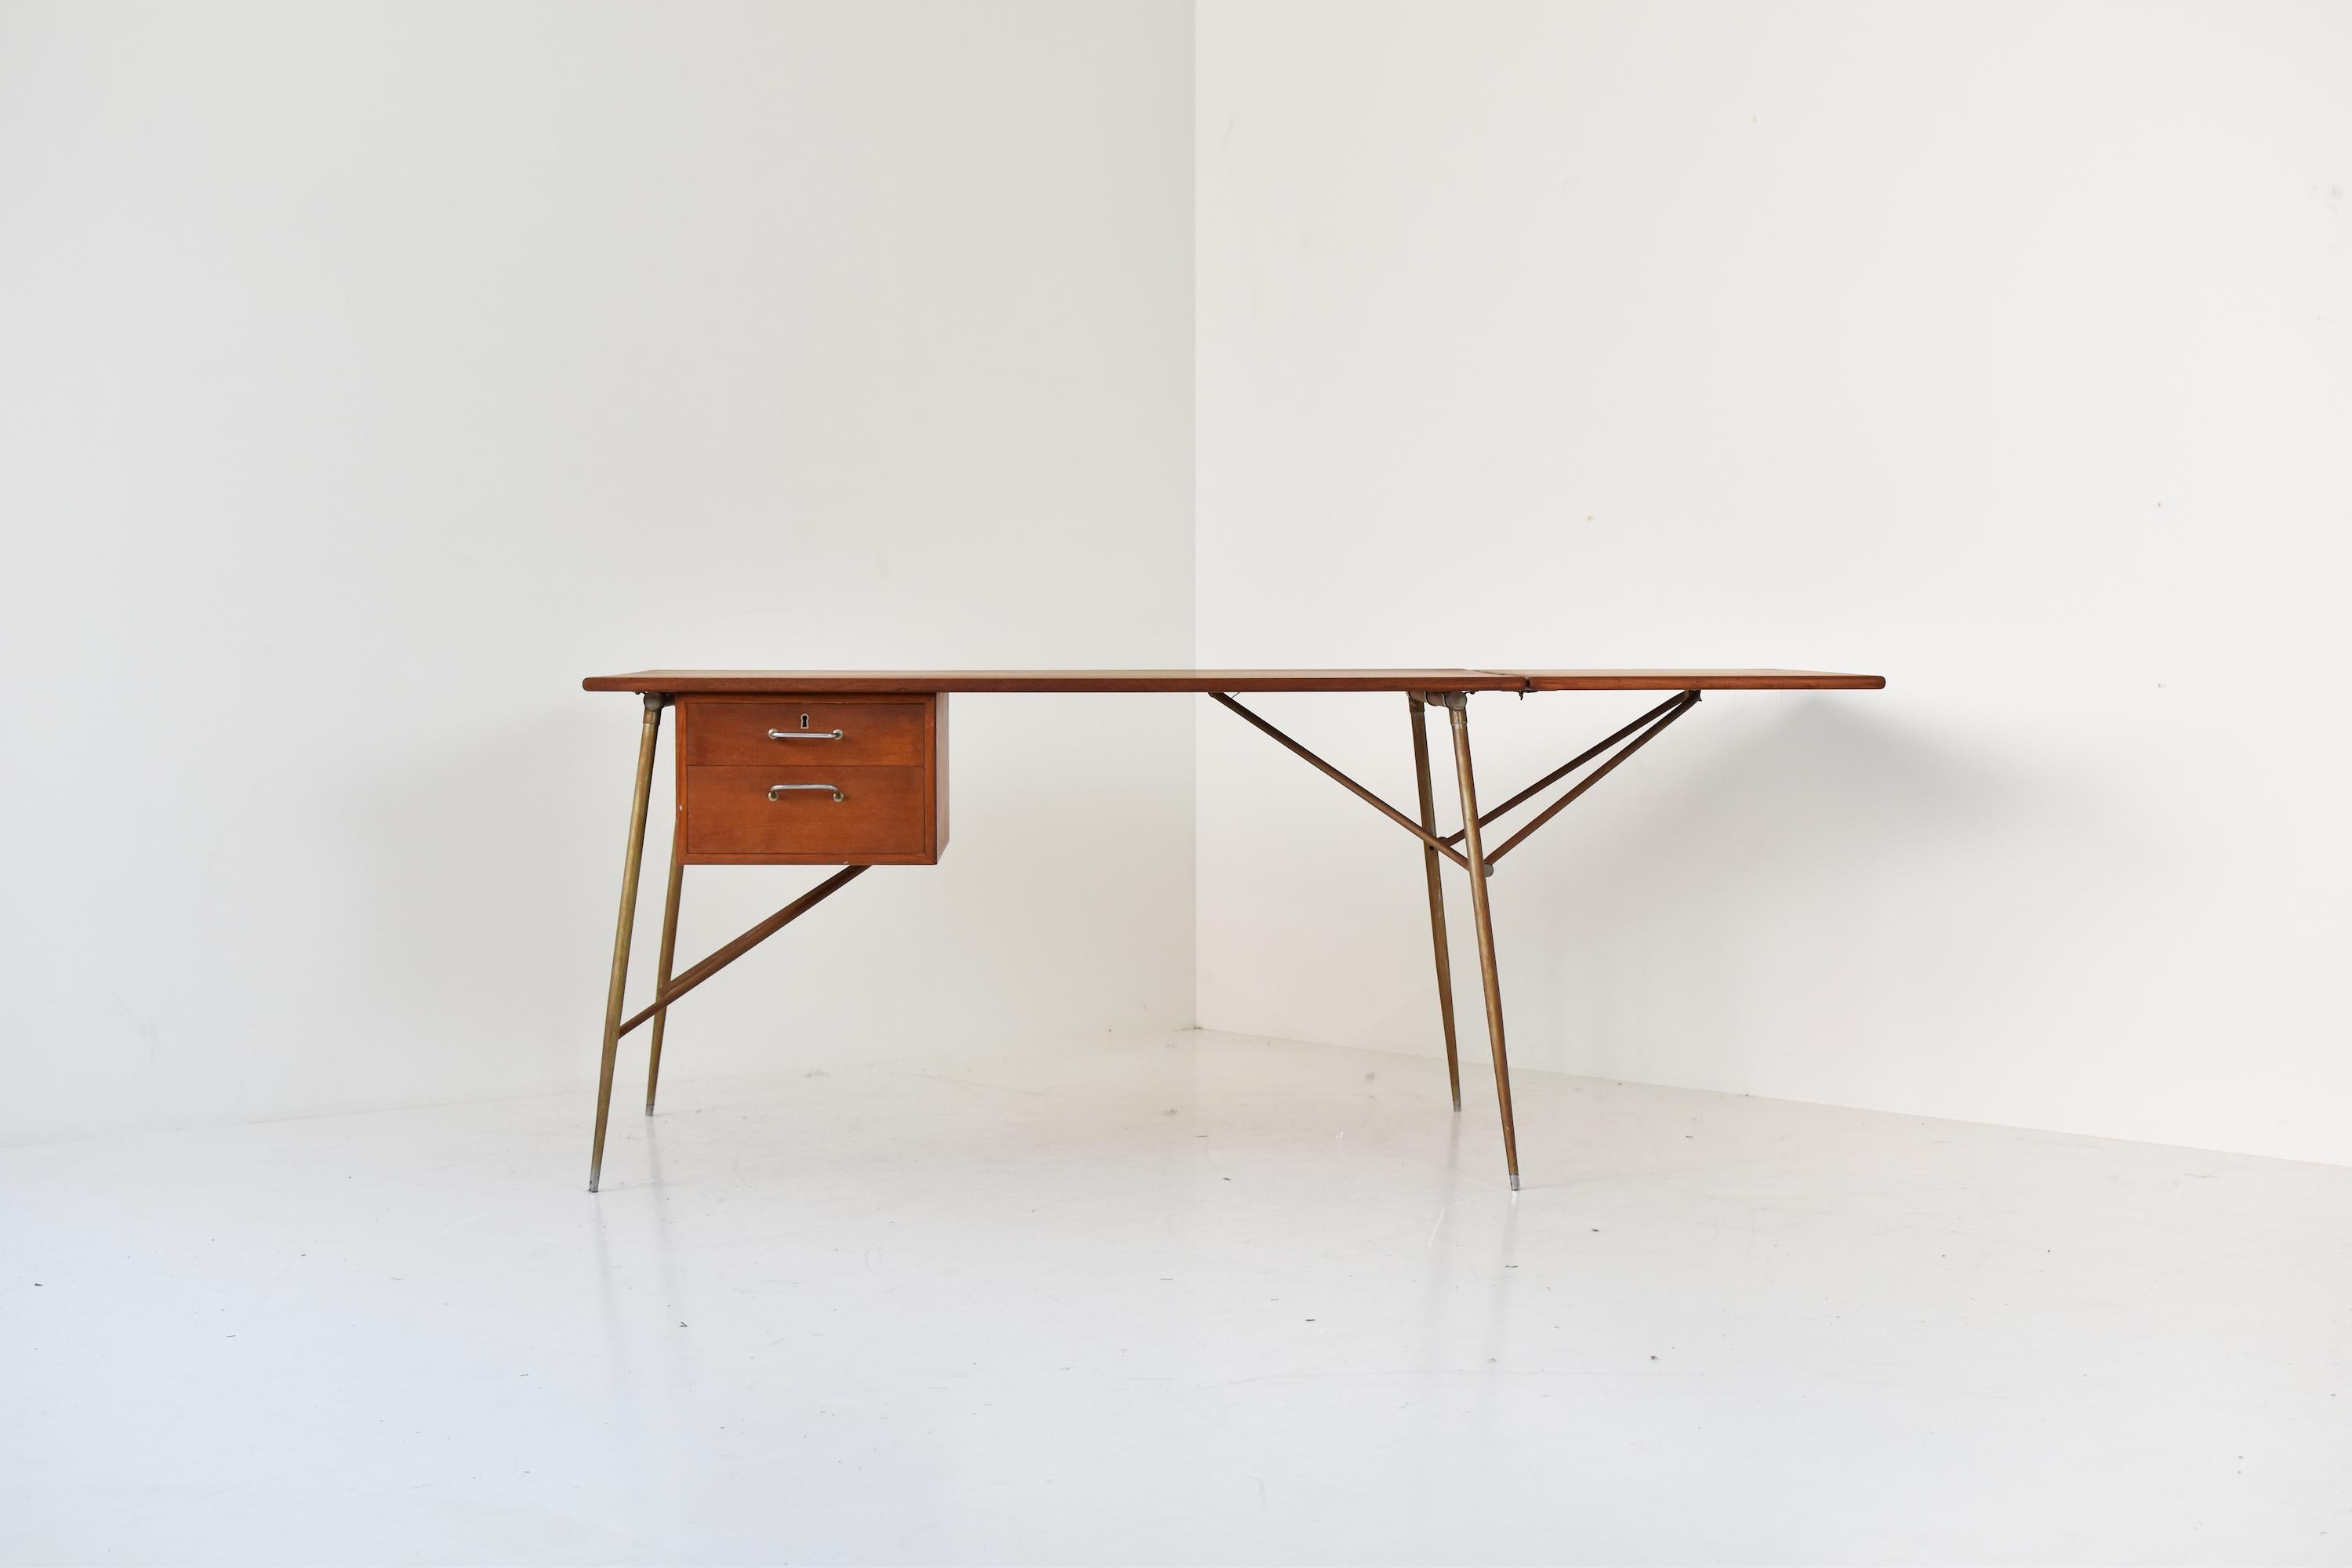 Rare drop leaf desk by Borge Mogensen for Søborg Mobelfabrik, Denmark 1950s. This architectural desk features a nickel plated base and a teak top with extension. Restored with love. Frame could be polished upon request. Masterpiece.